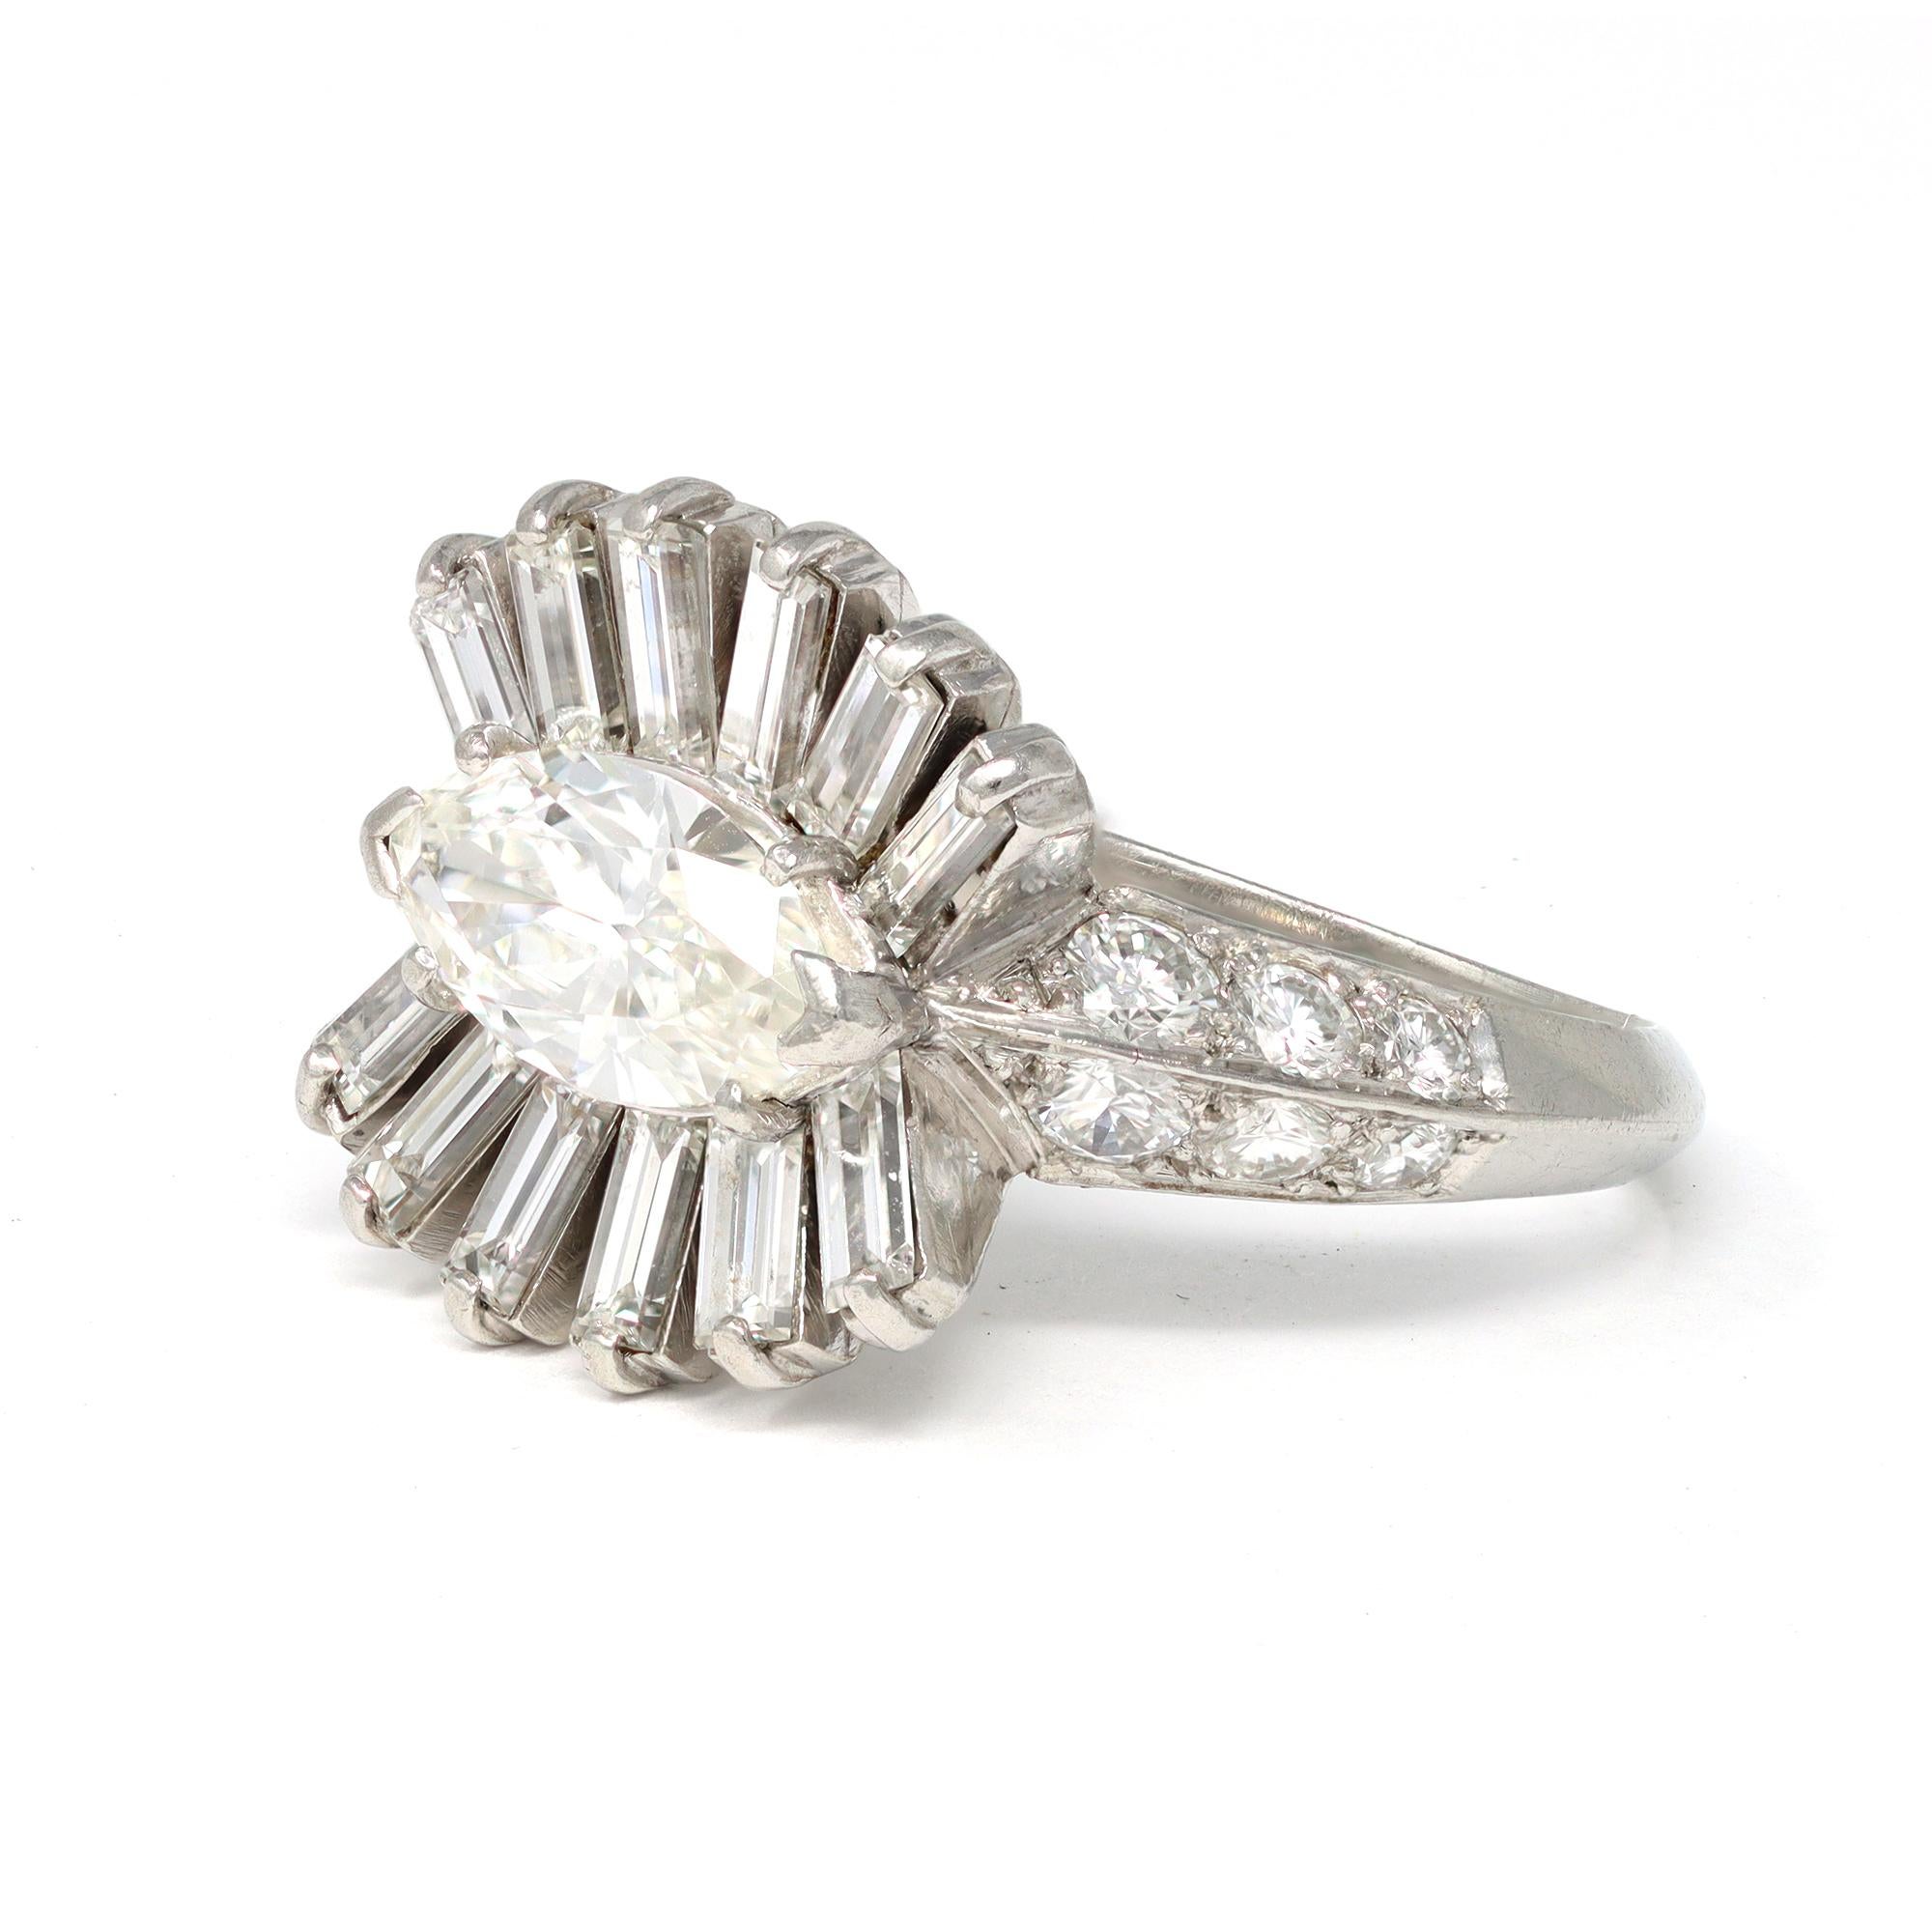 The handmade platinum cocktail/engagement ring was made in France circa 1950. It features an old marquise diamond in its center stone weighing approximately 1.10 carat G color VS clarity. The solitaire marquise is surrounded by a basket of baguette